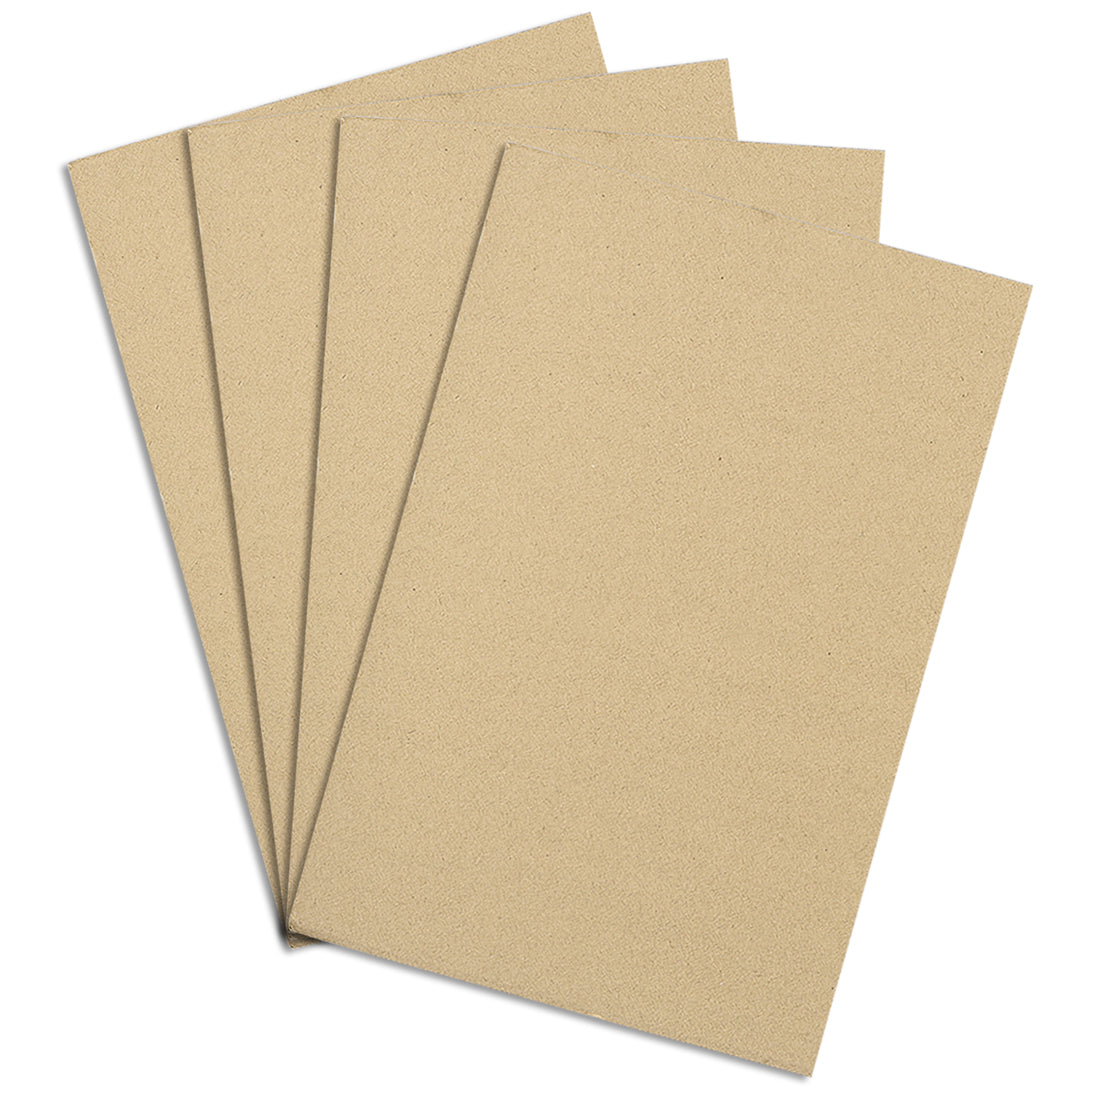 uxcell Uxcell Corrugated Cardboard Filler Insert Sheet Pads 3-Layer 3mm x 8 x 12-Inch 4pcs